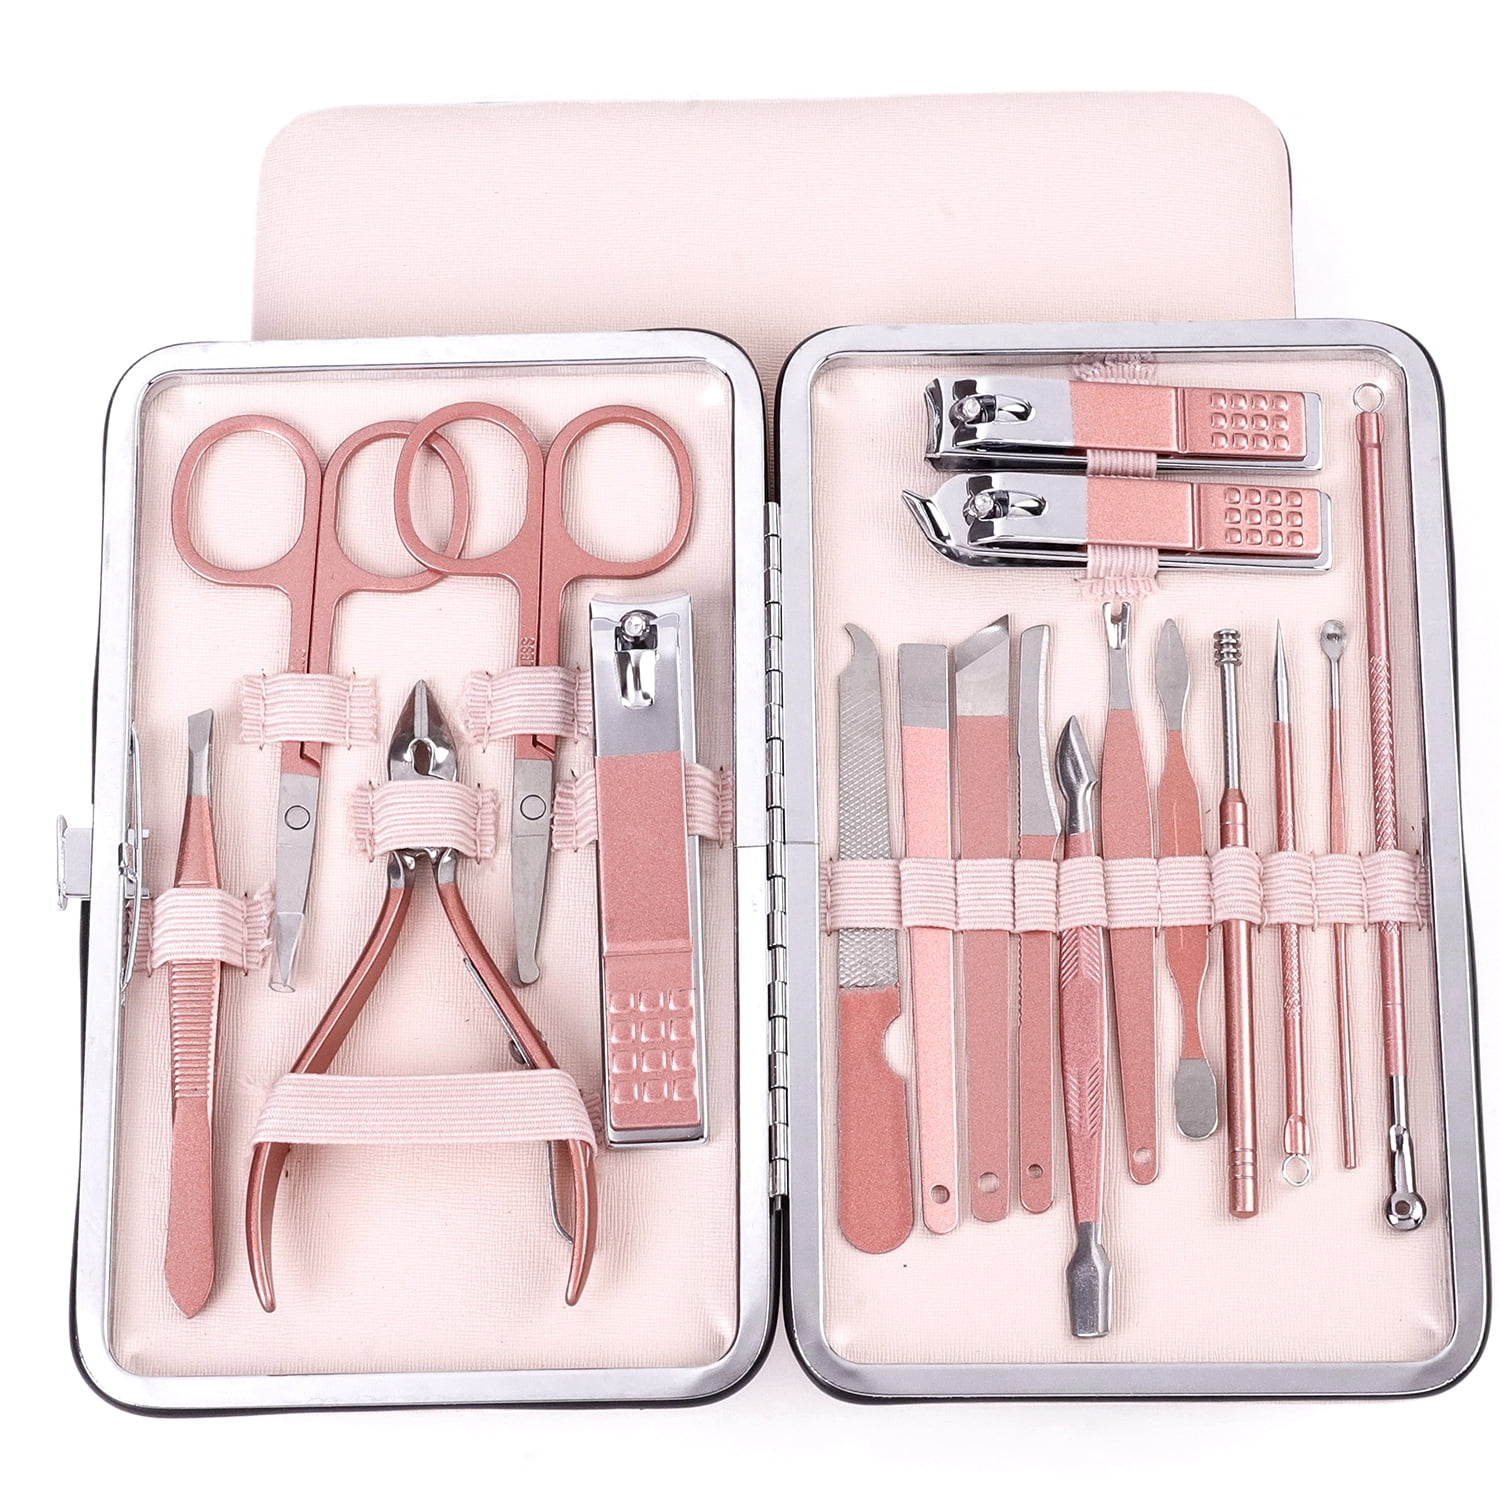 FUMAX 8PCS Nail Clippers Set Bulk for Men Women, Ultra Sharp Finger Nail  Clippers Adult and Toenail Clippers, Manicure Set with Nail Cleaner/File &  Sturdy Metal Tin Case - Yahoo Shopping